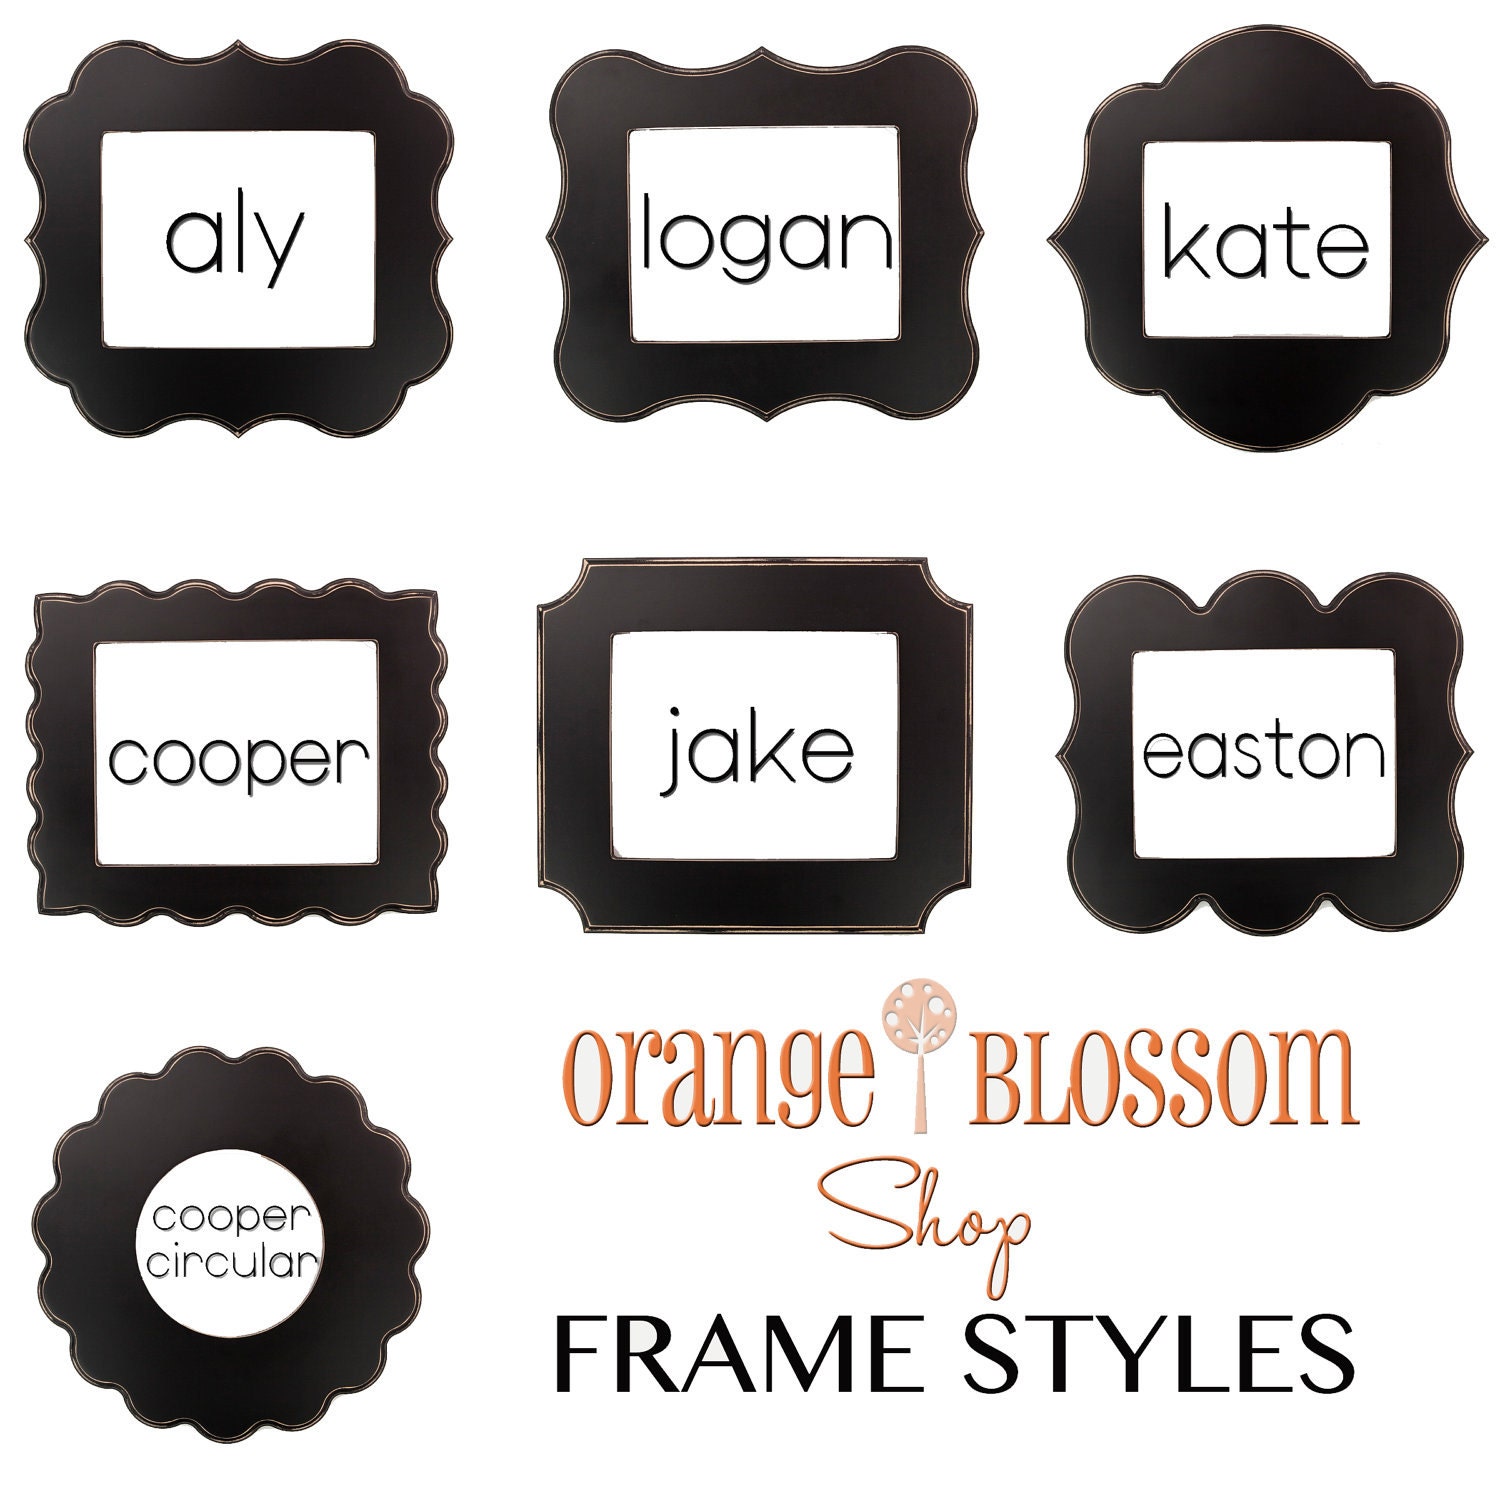 8x10 whimsical and unique picture frame. Pick your style and color